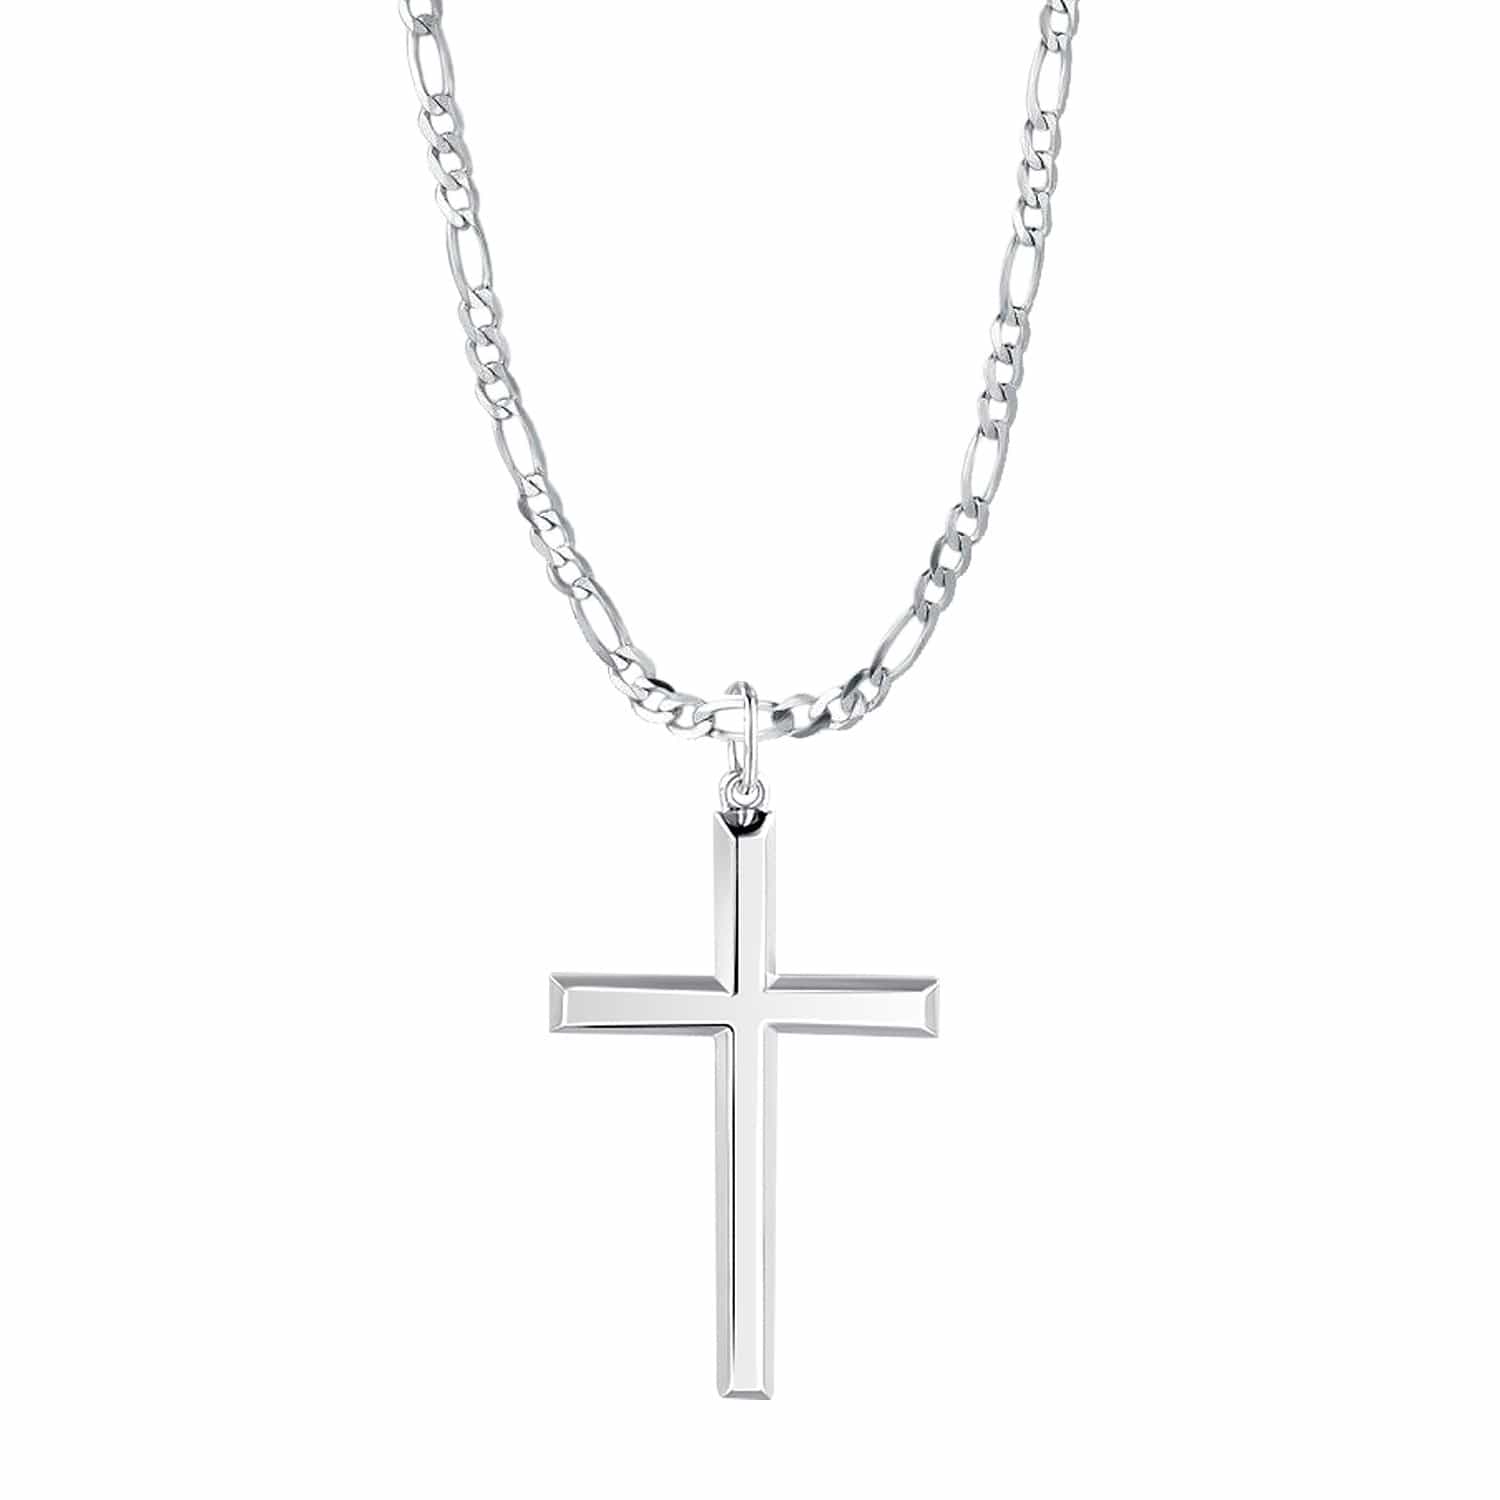 FANCIME High Polished Cross Sterling Silver Necklace Main